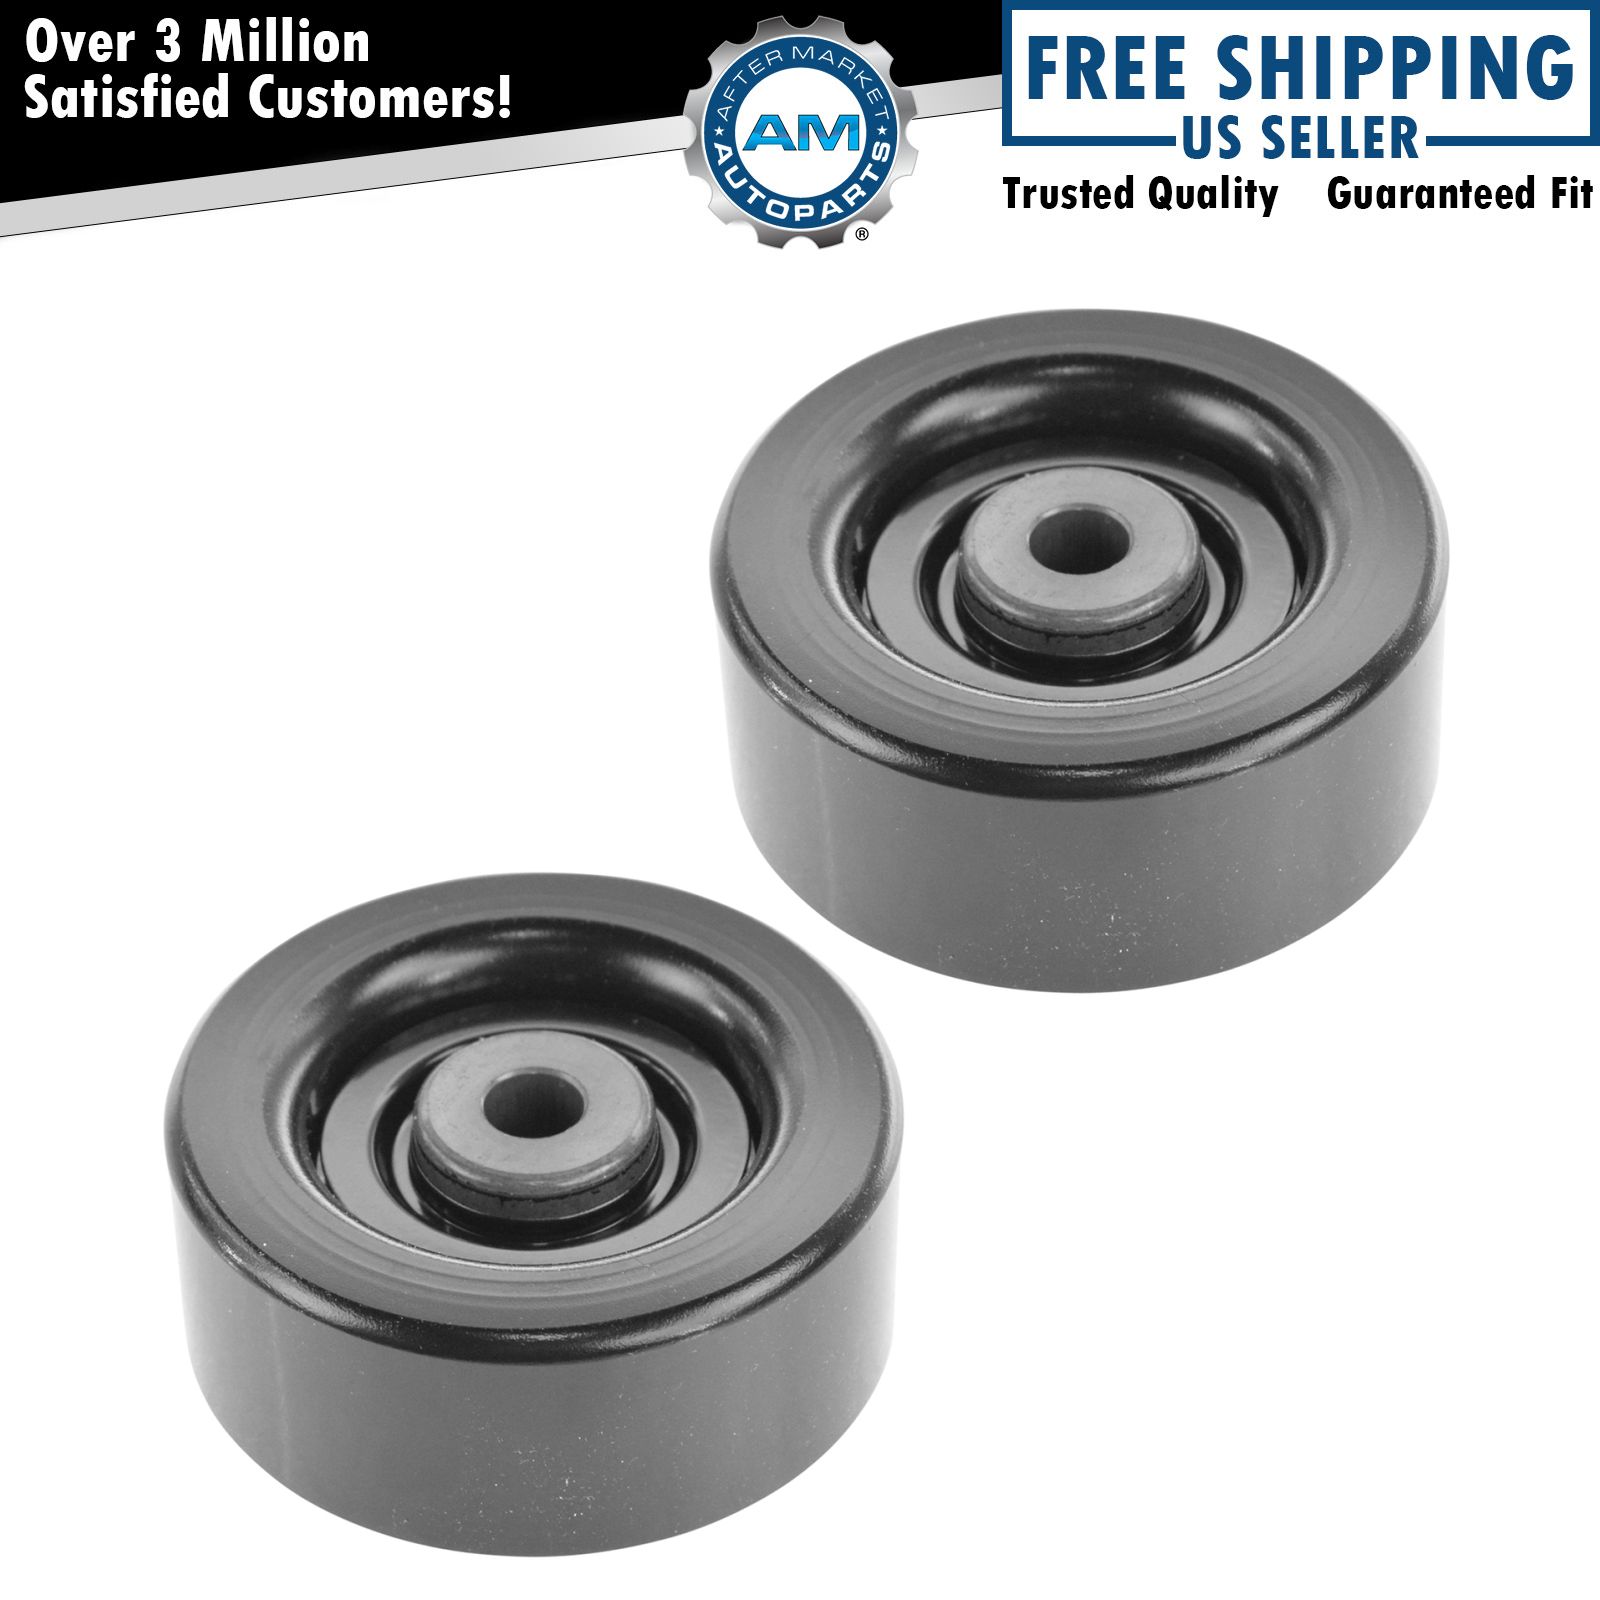 AC Delco 15-40526 Serpentine Belt Idler Pulley Pair Set for Chevy GMC